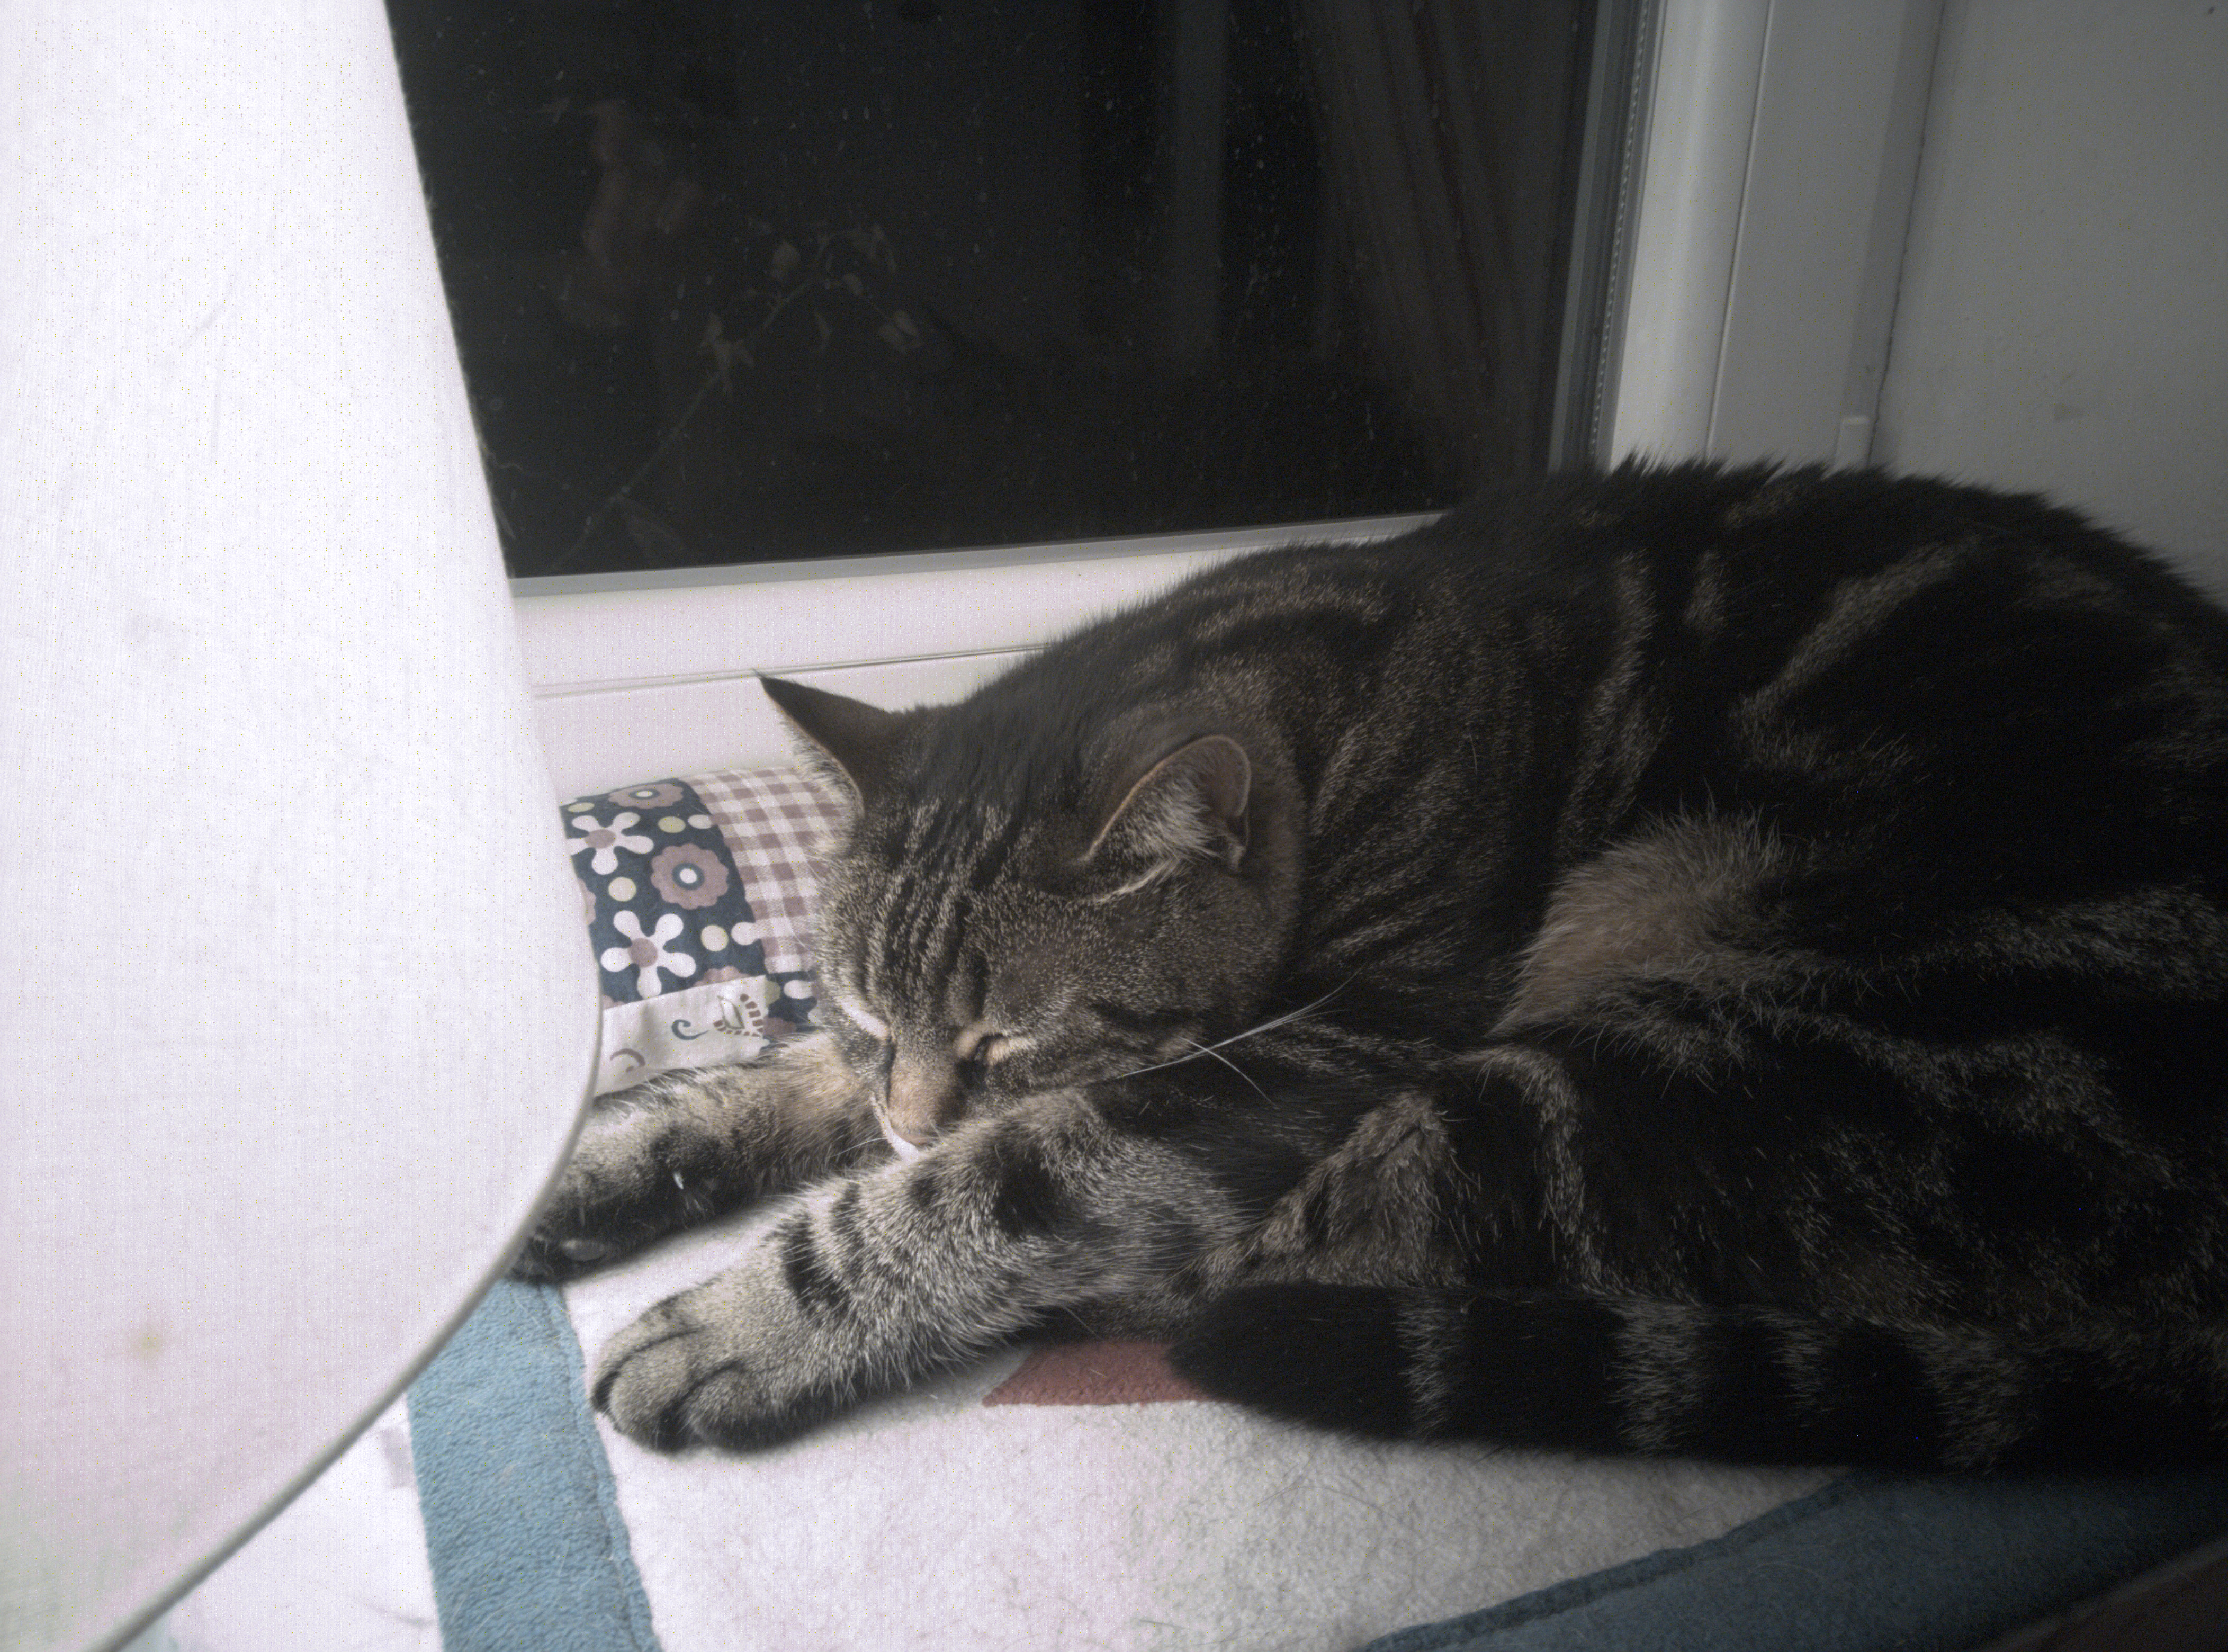 A classic cat picture, taken from a Librem 5